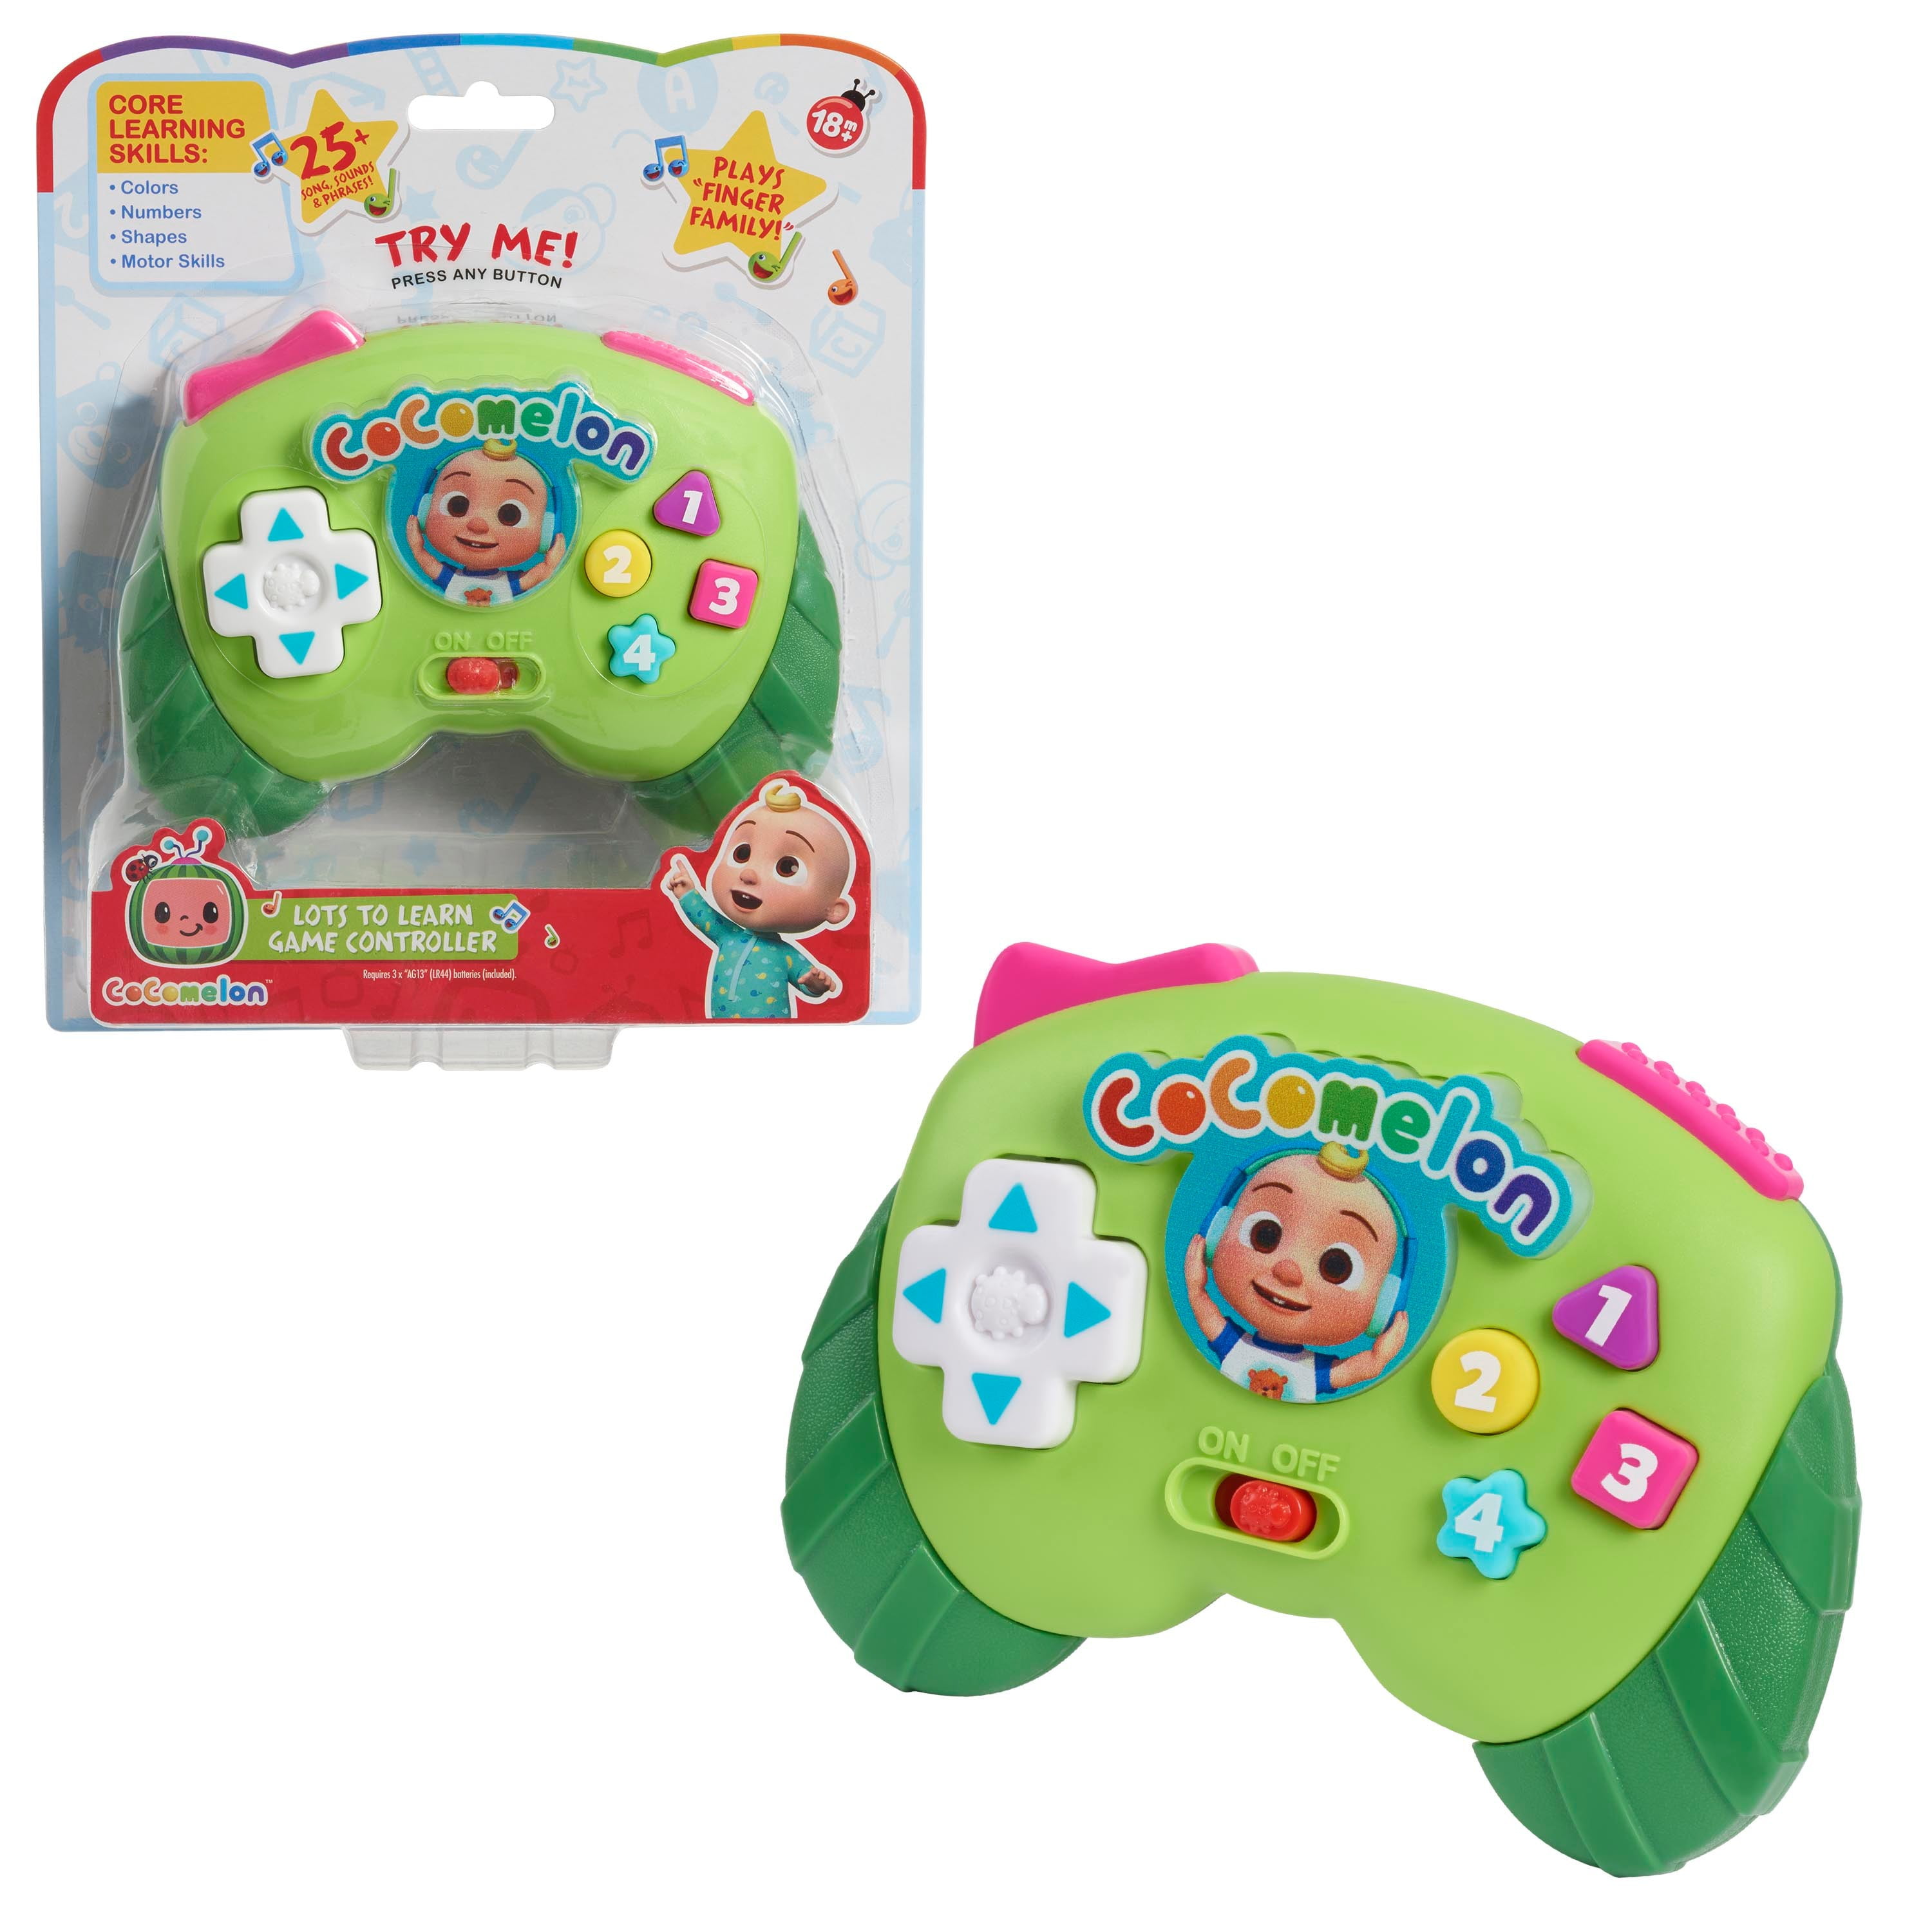 CoComelon Lots to Learn Game Controller, Preschool Learning and Education, Officially Licensed Kids Toys for Ages 18 Month, Gifts and Presents